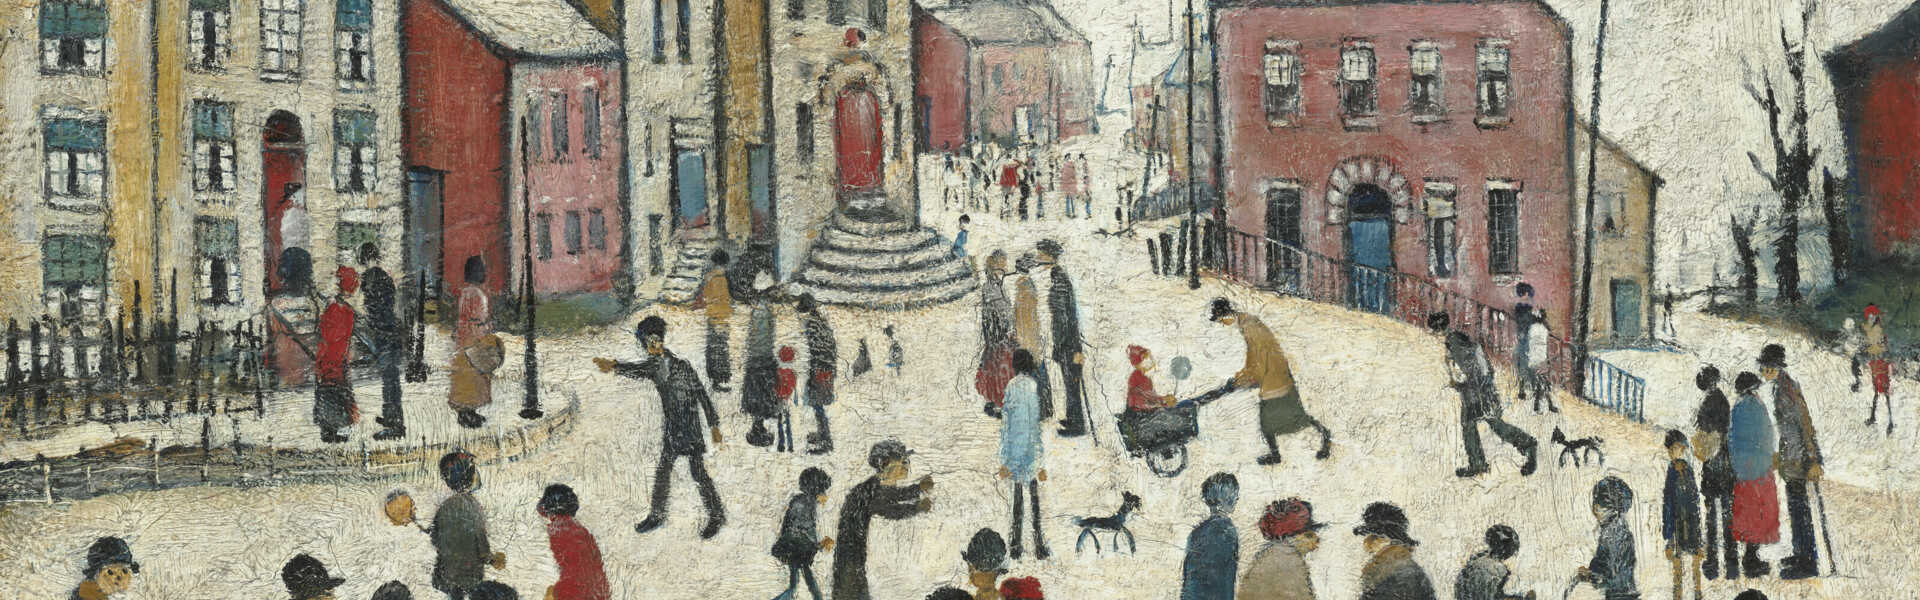 LAURENCE STEPHEN LOWRY, R.A. (1887-1976)